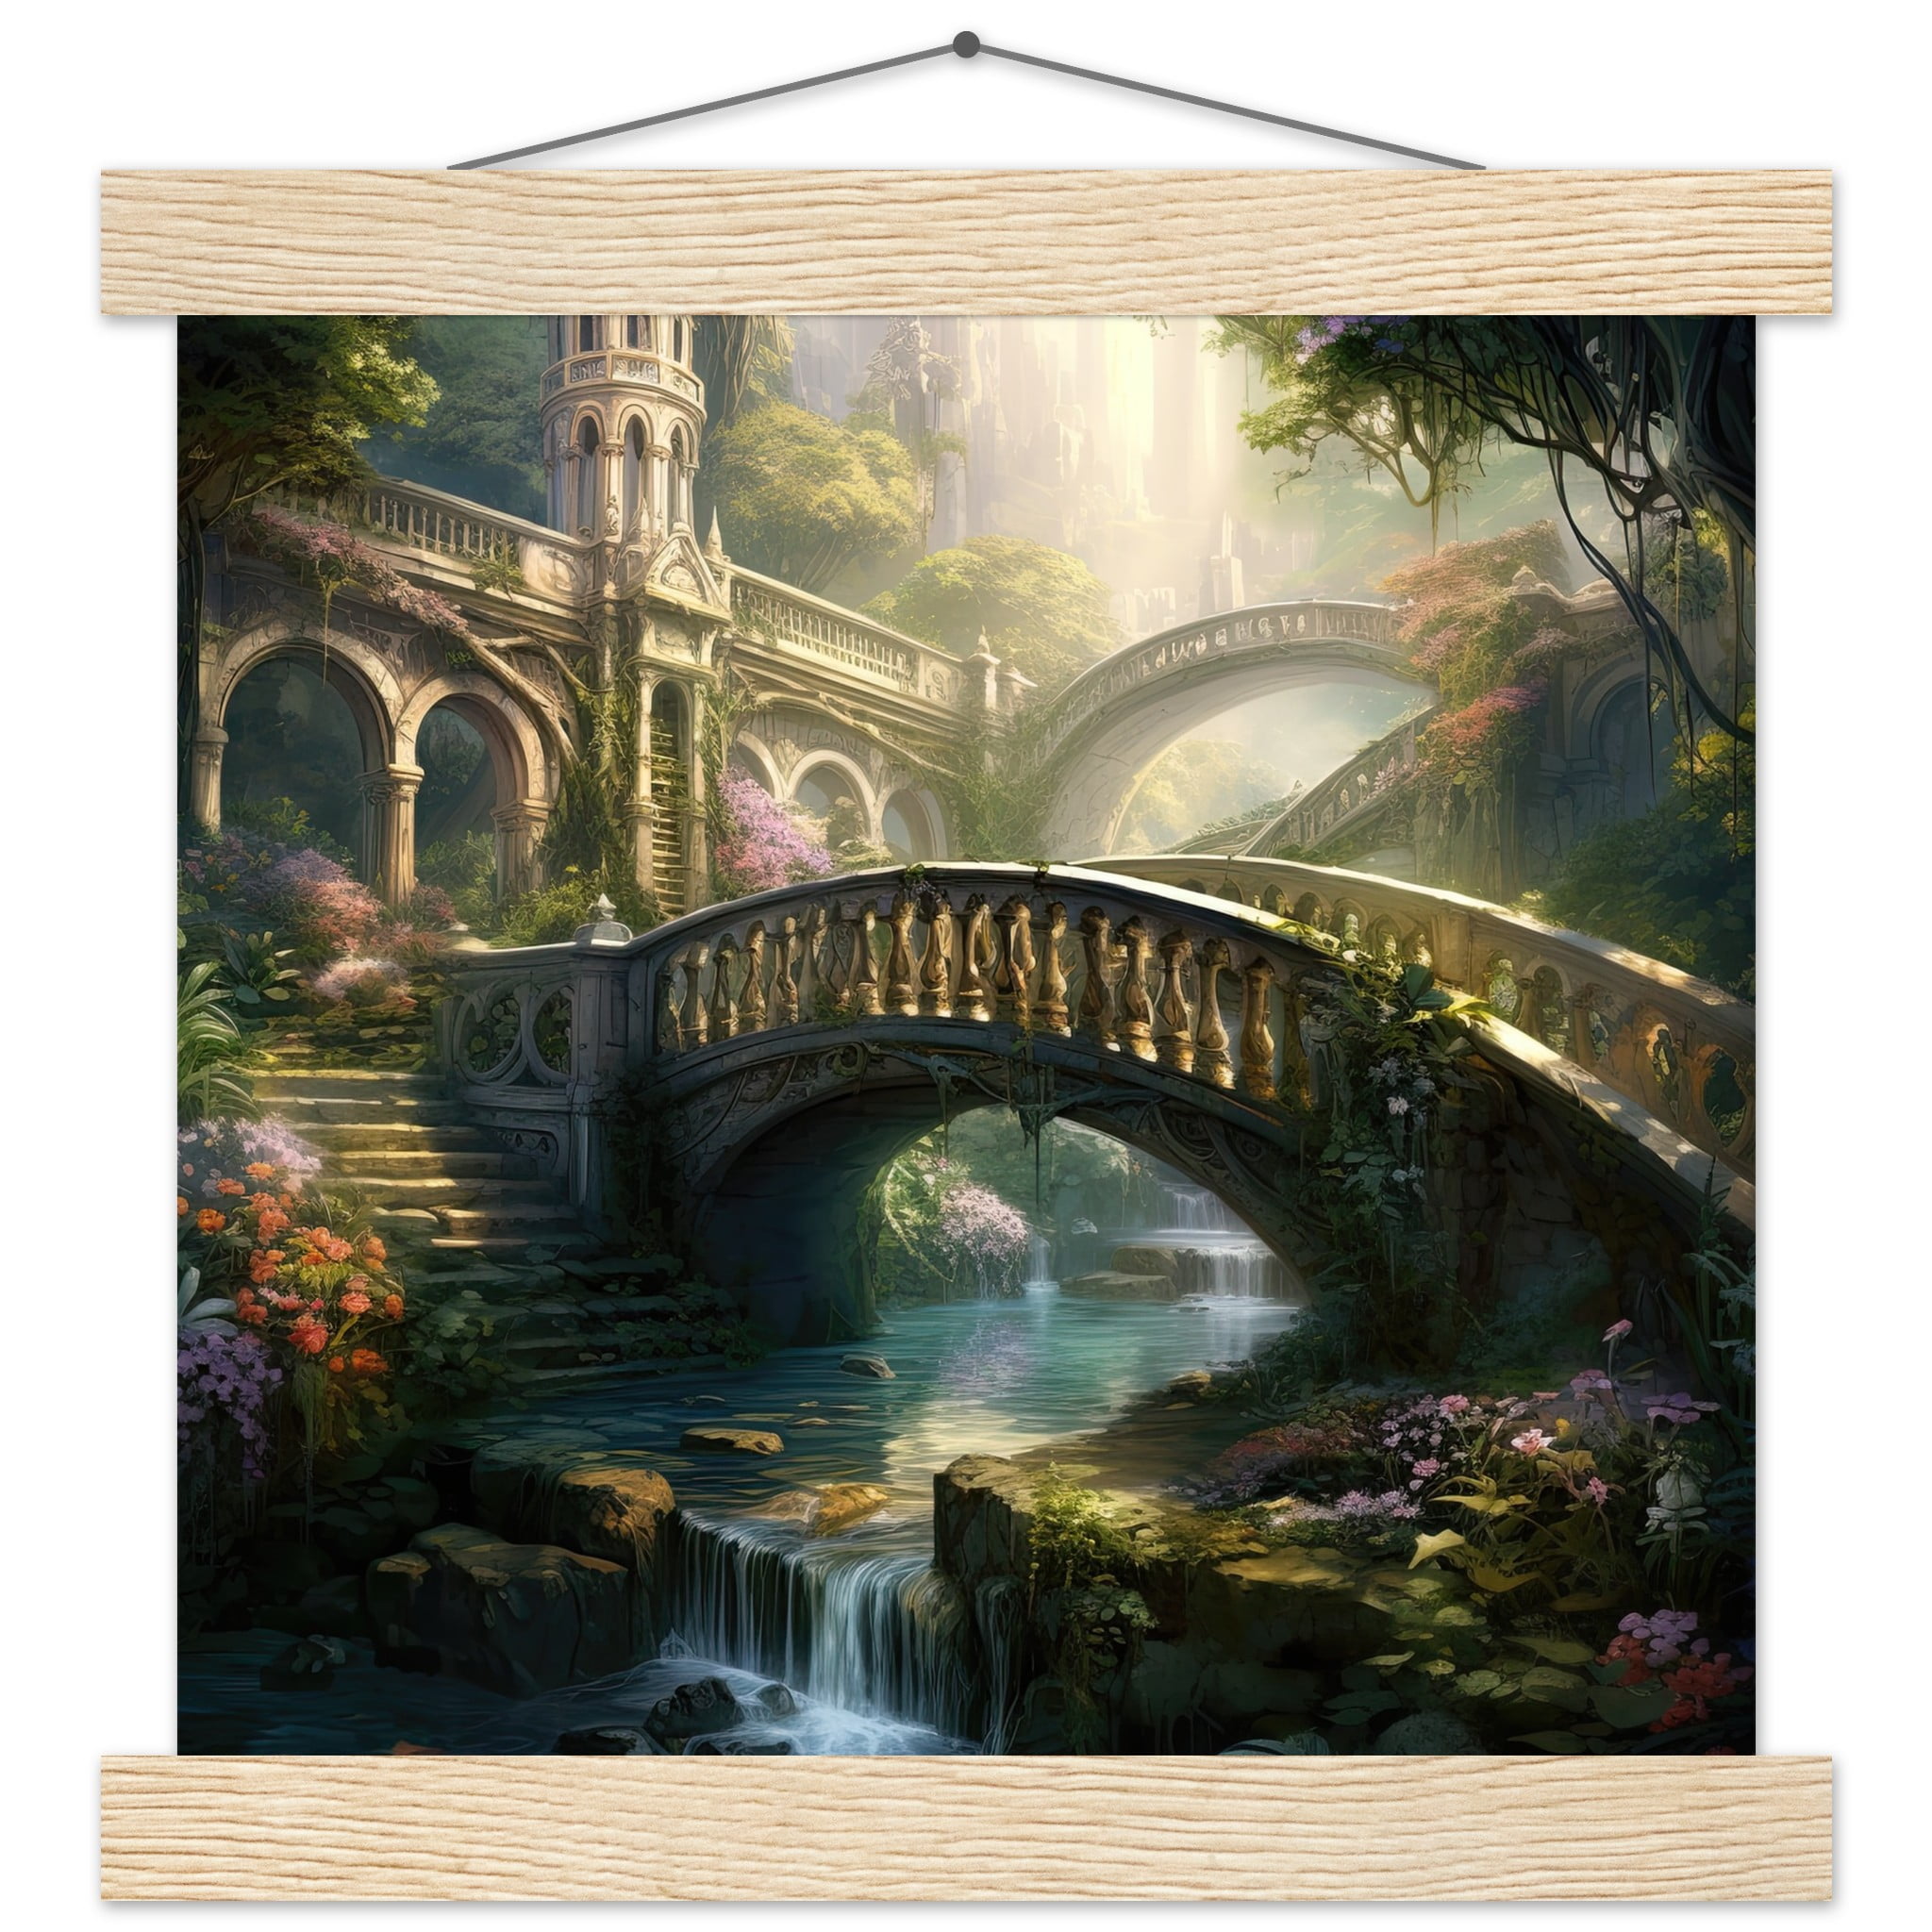 Bridge to the Kingdom of Paradise Art Print with Hanger - 25x25 cm / 10x10″, Natural wood wall hanger